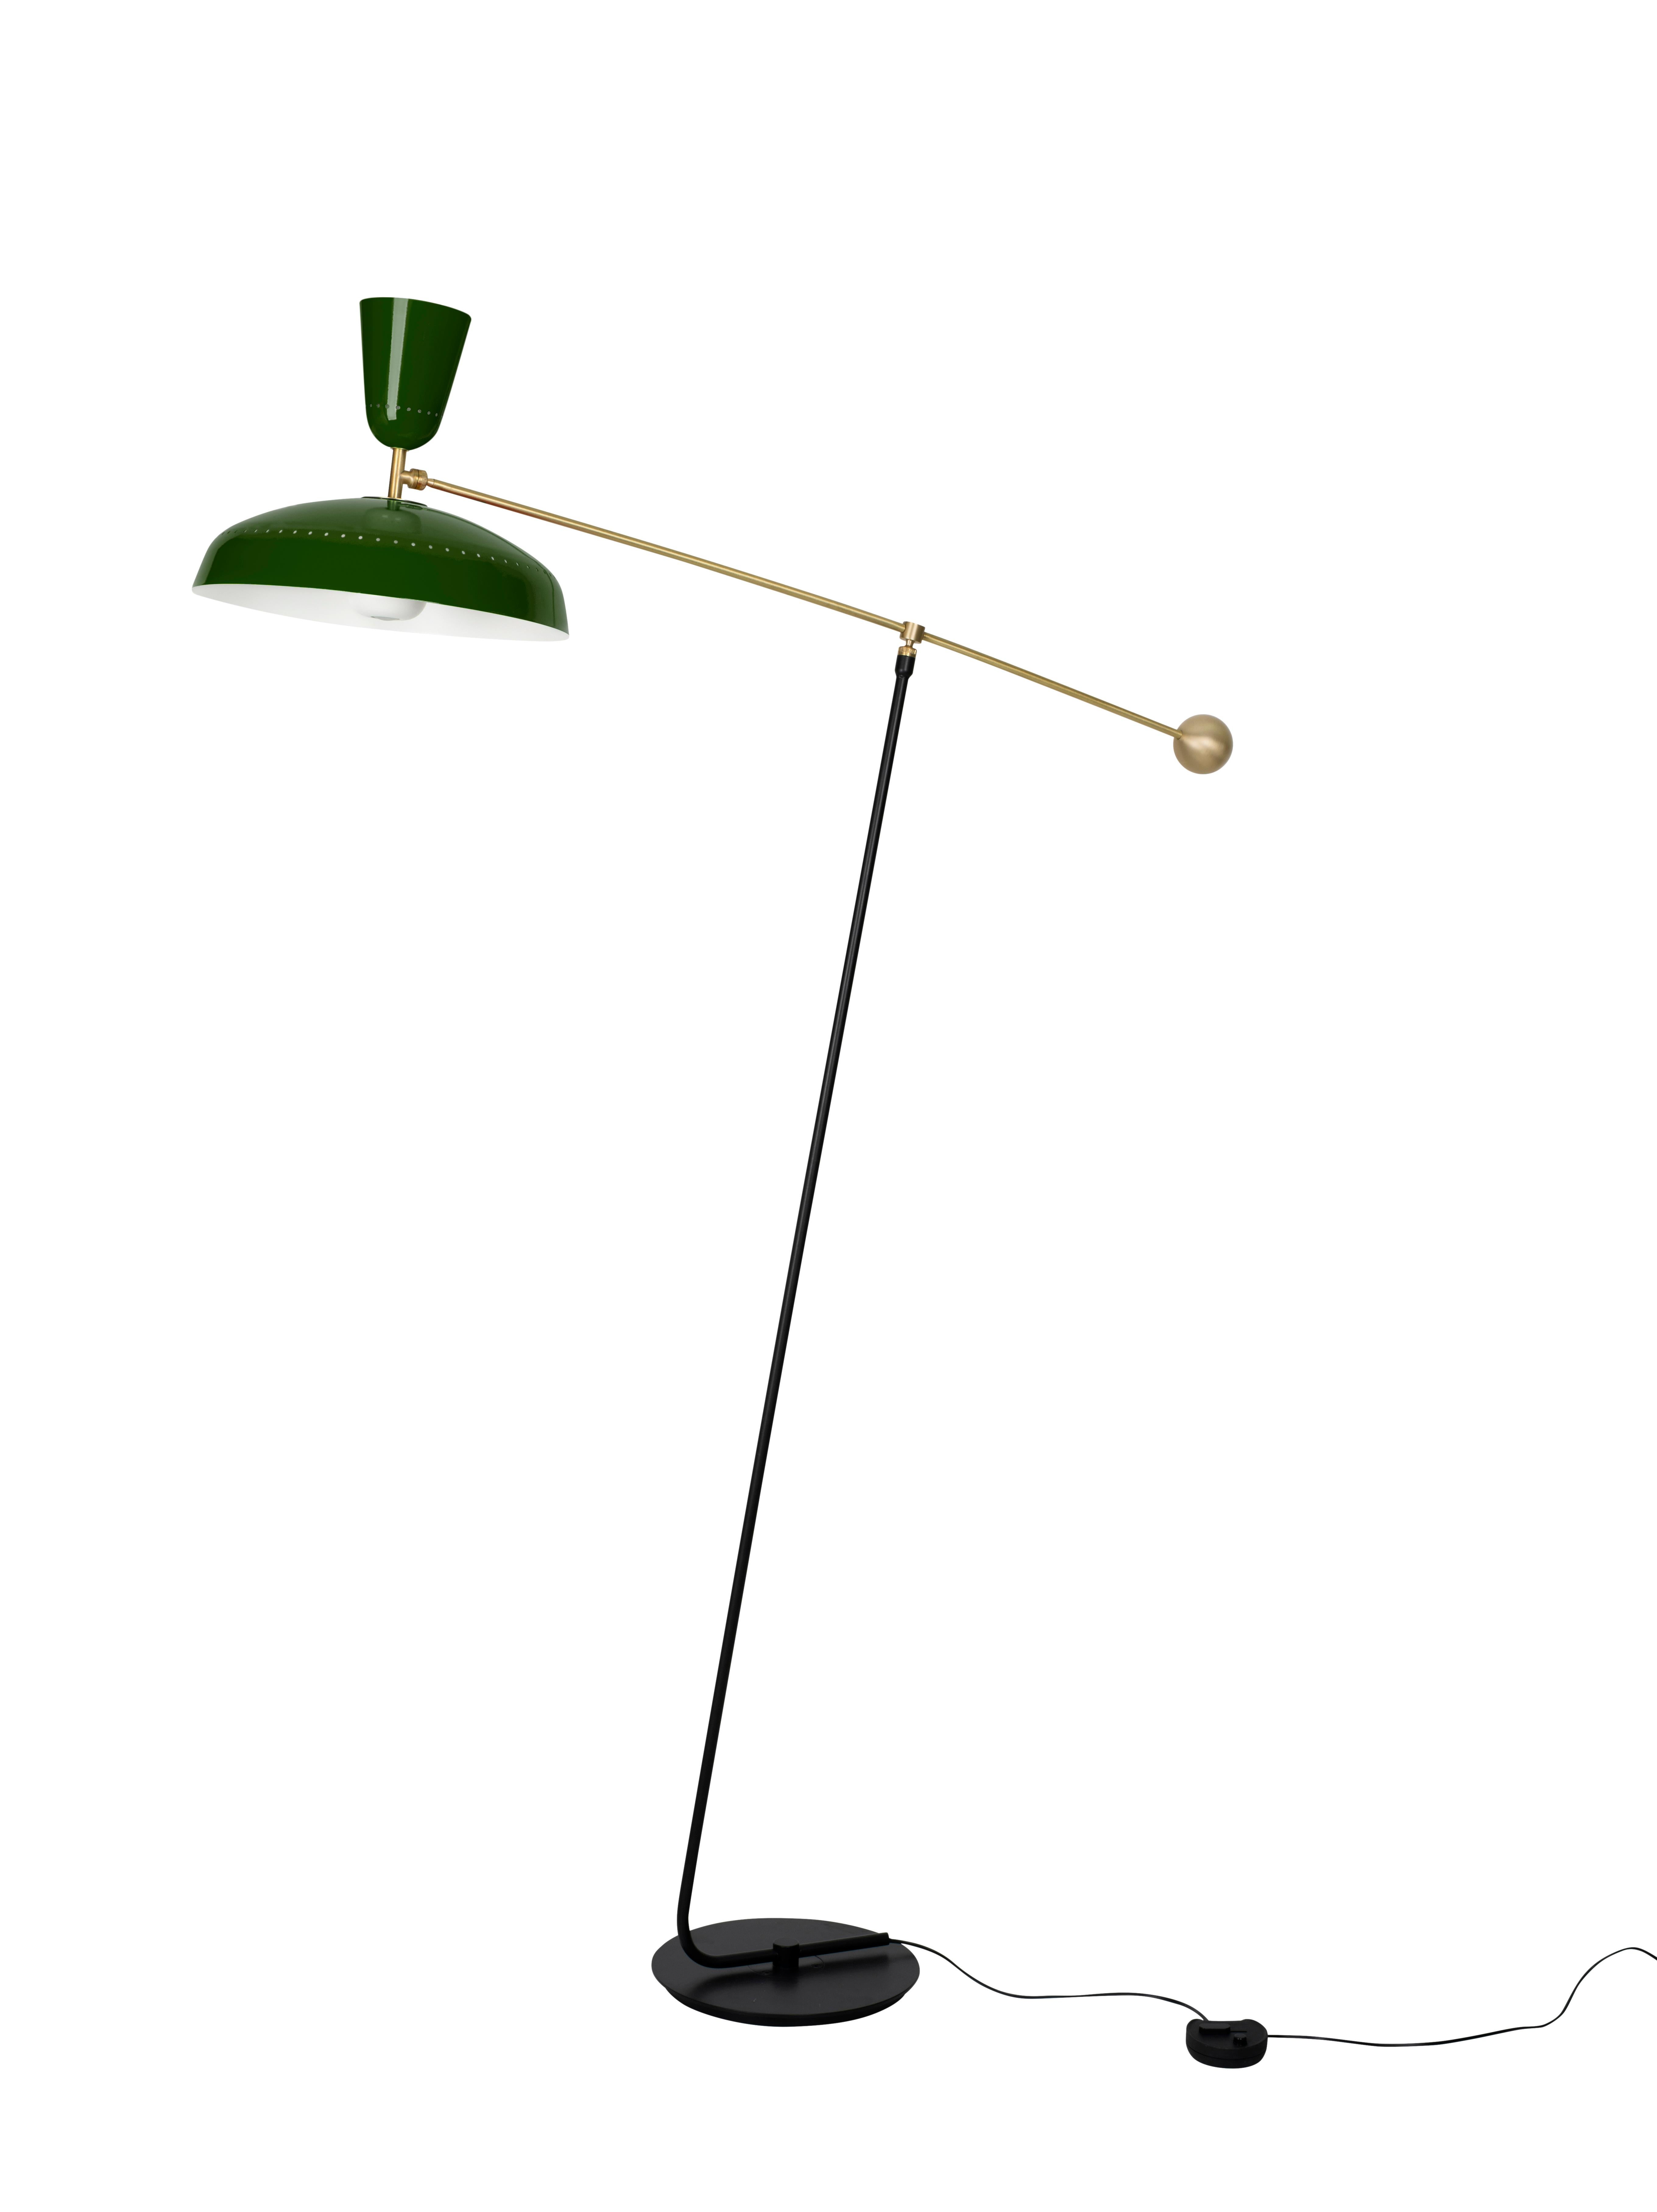 Contemporary Large Pierre Guariche 'G1' Floor Lamp for Sammode Studio in Green For Sale